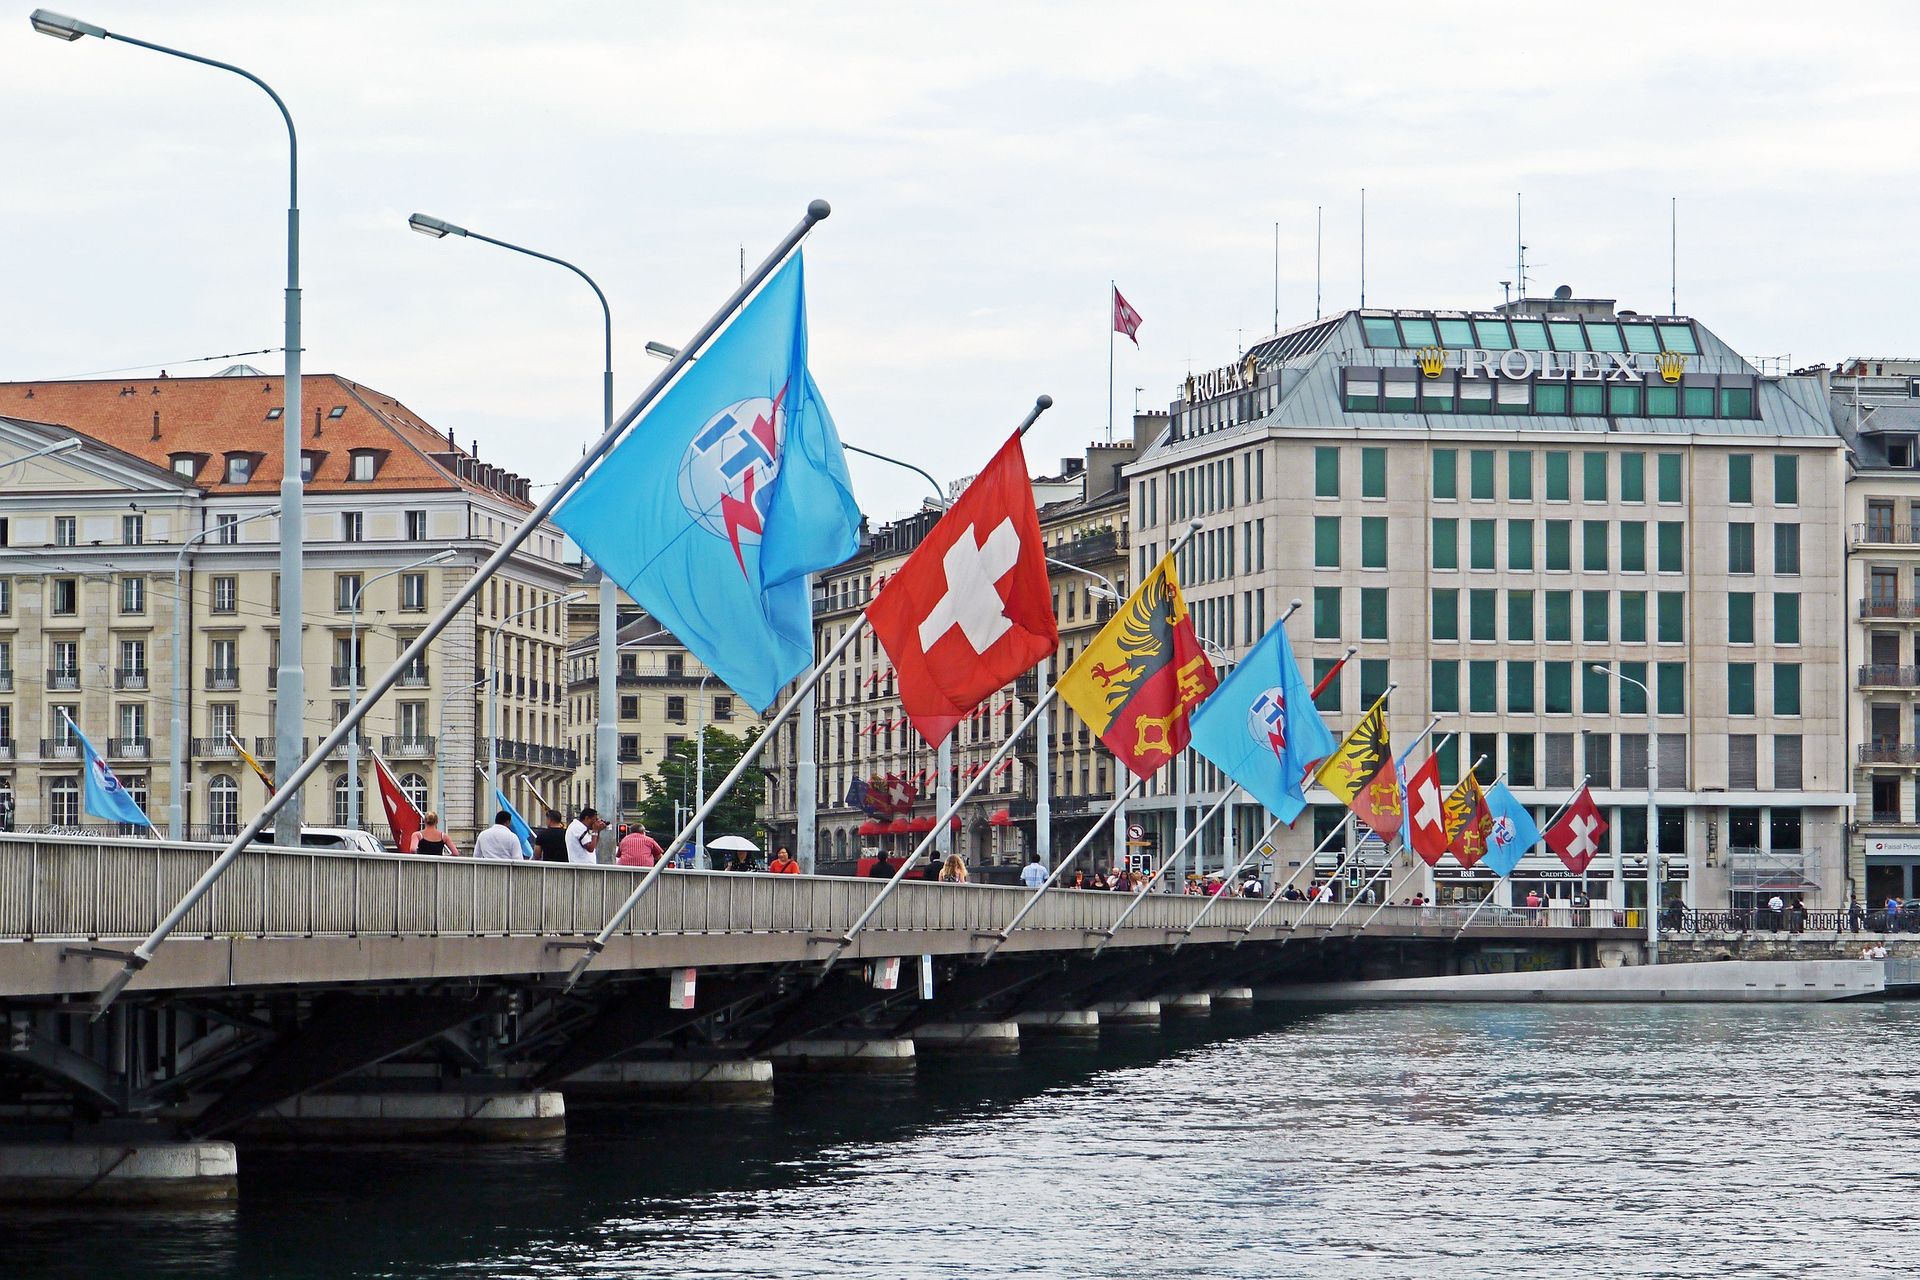 Geneva is one of the most populous cities and with the highest infrastructure density in Switzerland